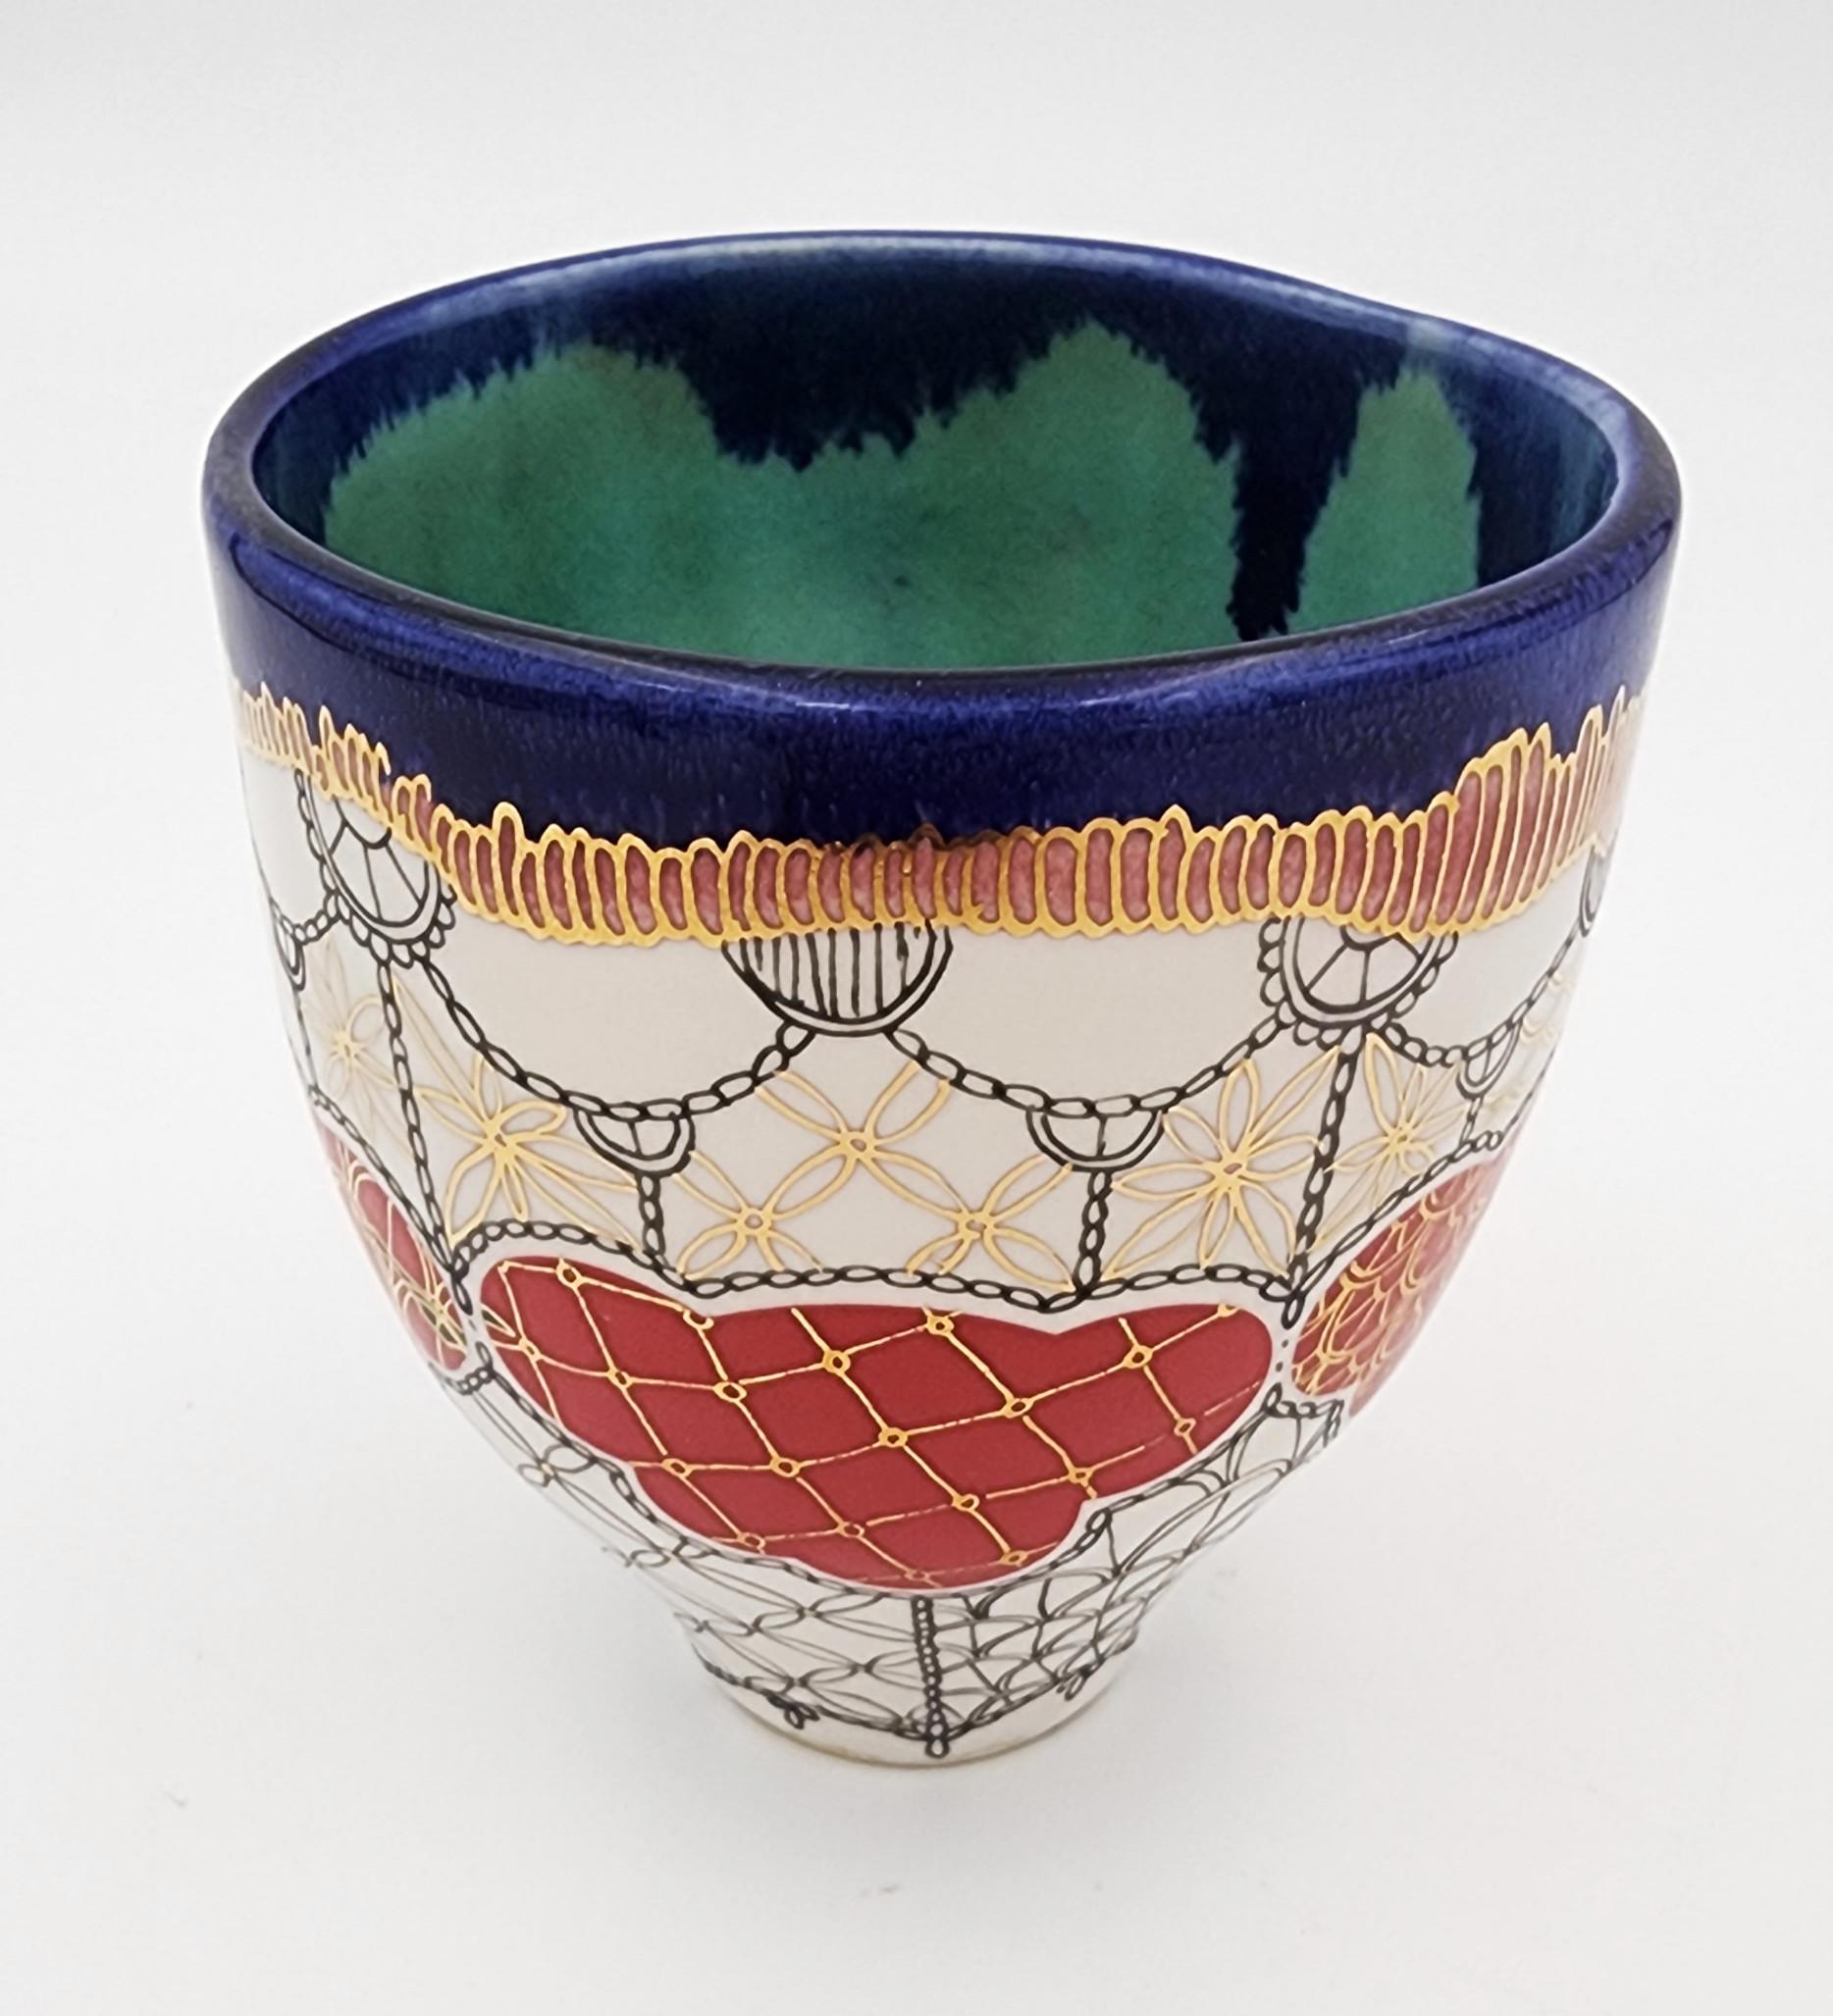 Melanie Sherman Abstract Sculpture - Cup with Patterns I (Hand-Painted, Gold Luster)